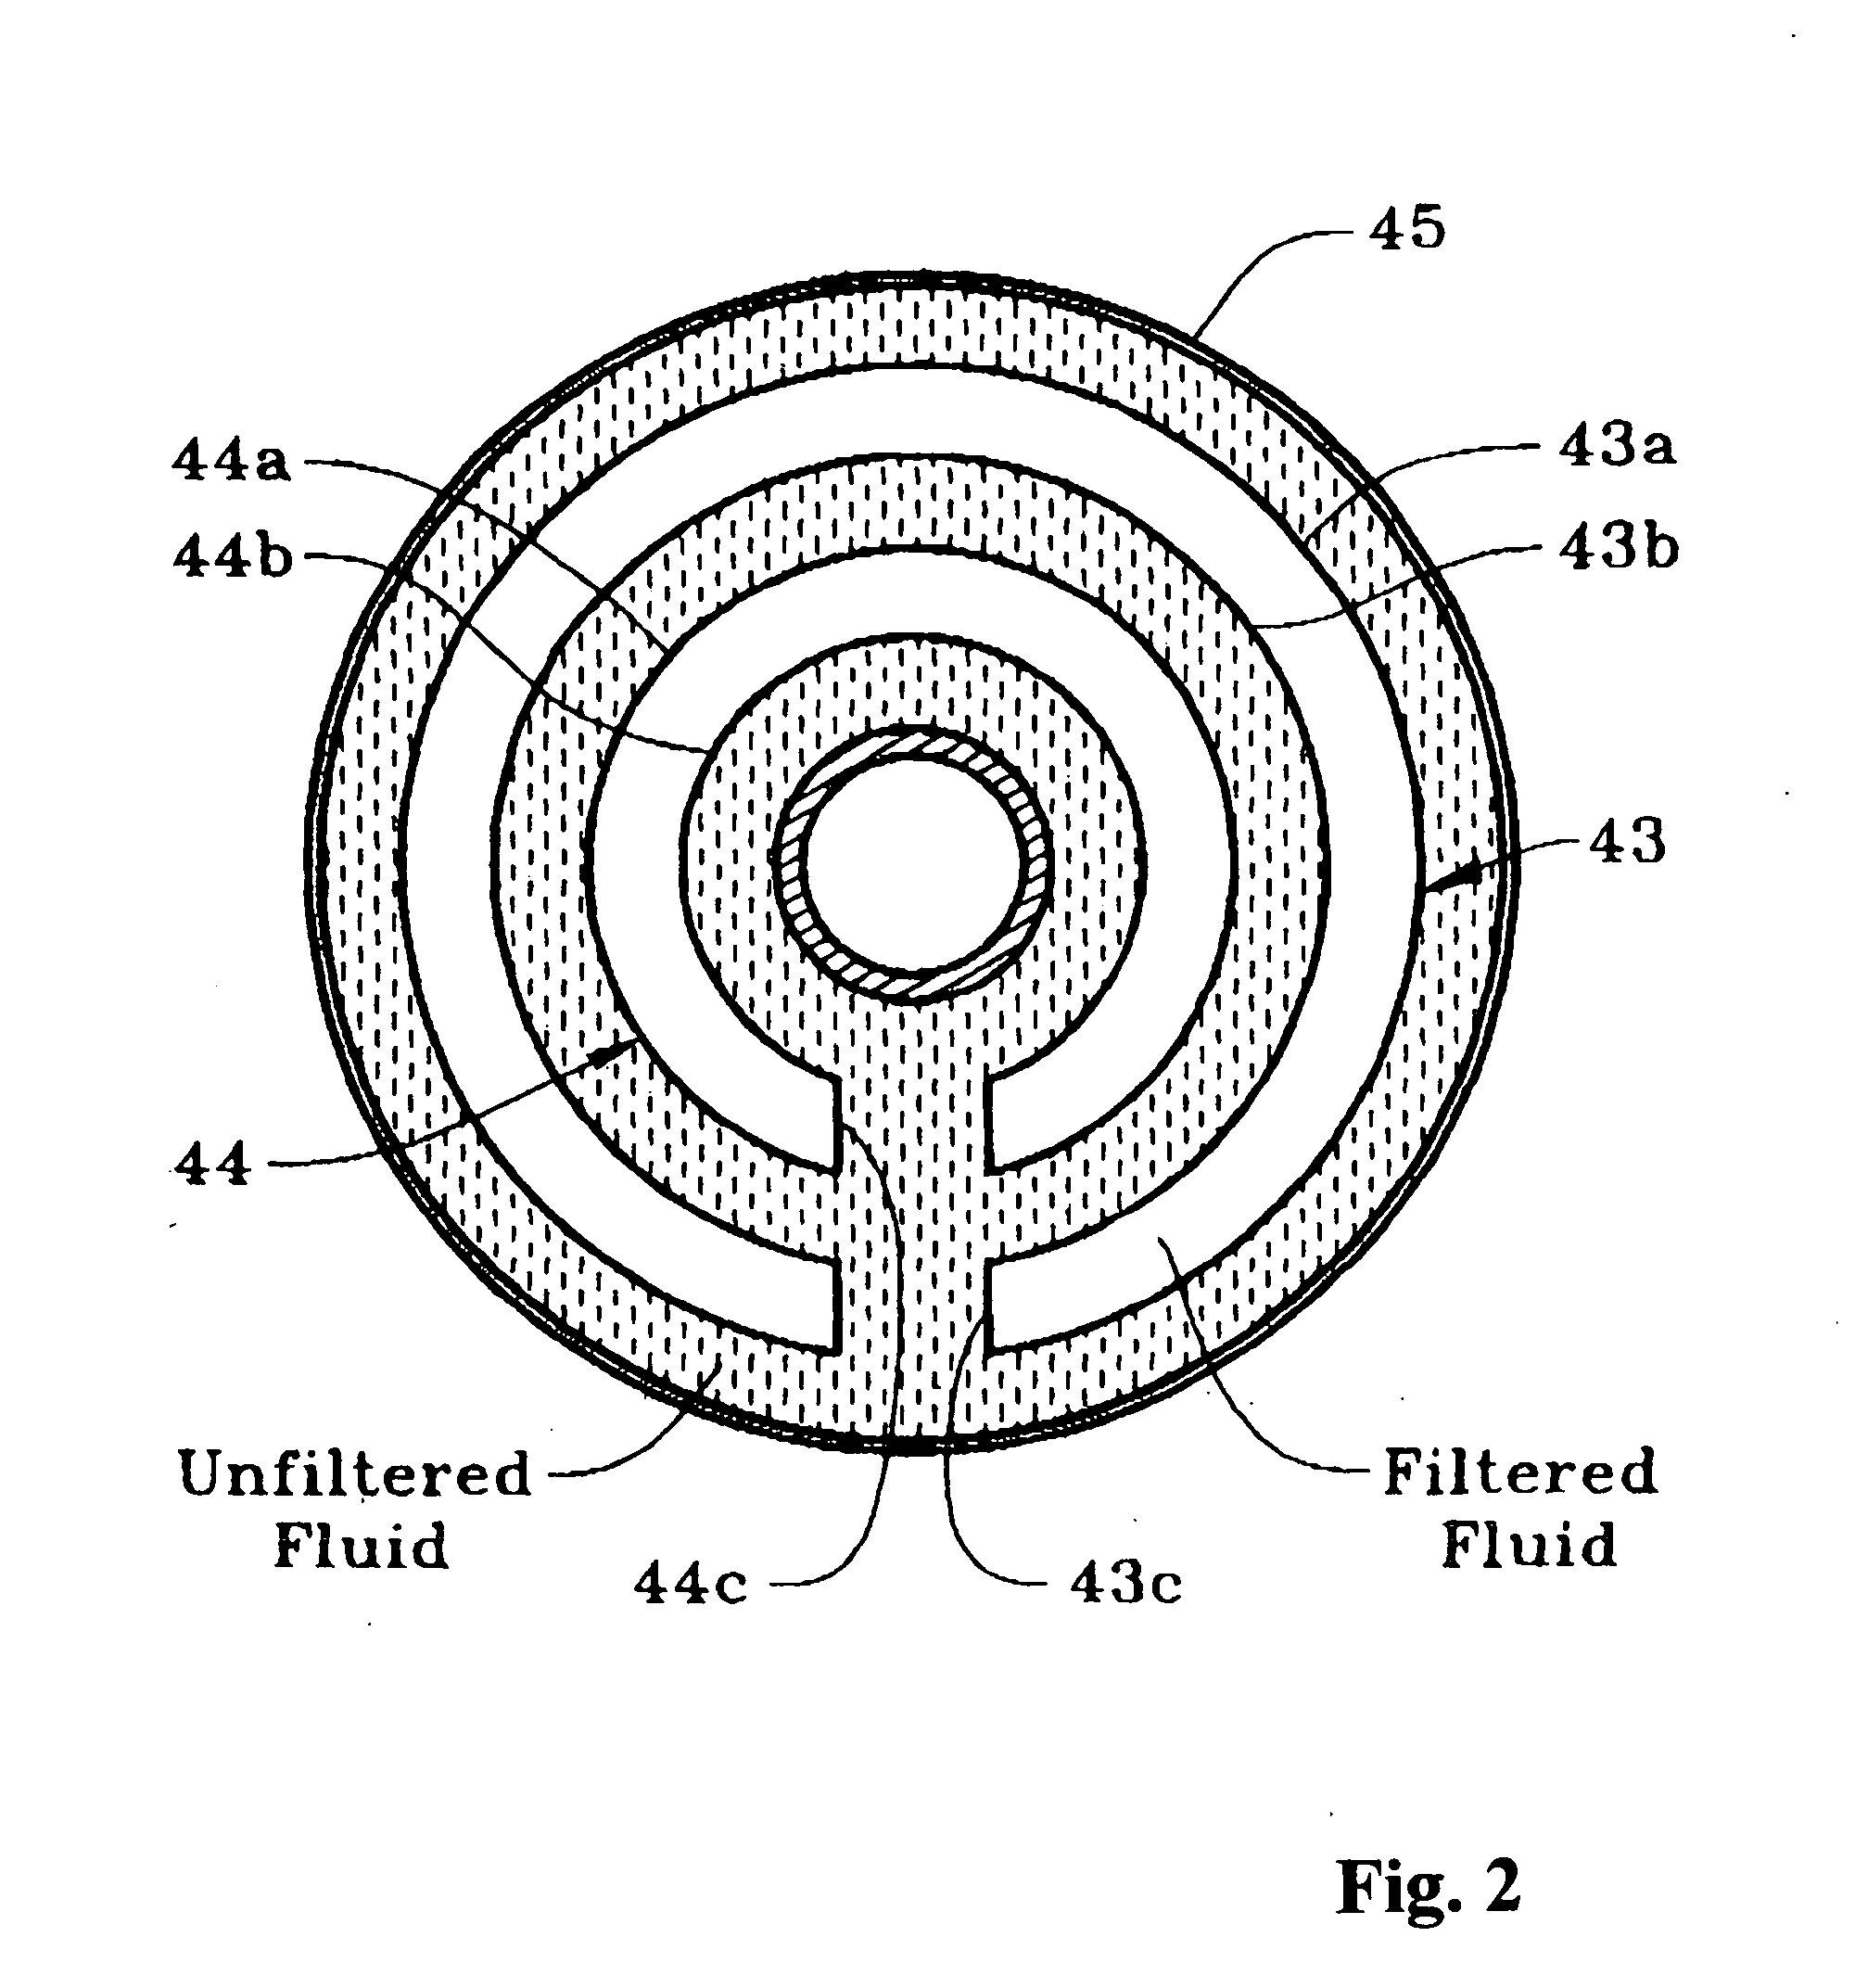 Concentric C-shaped filter and screen topology